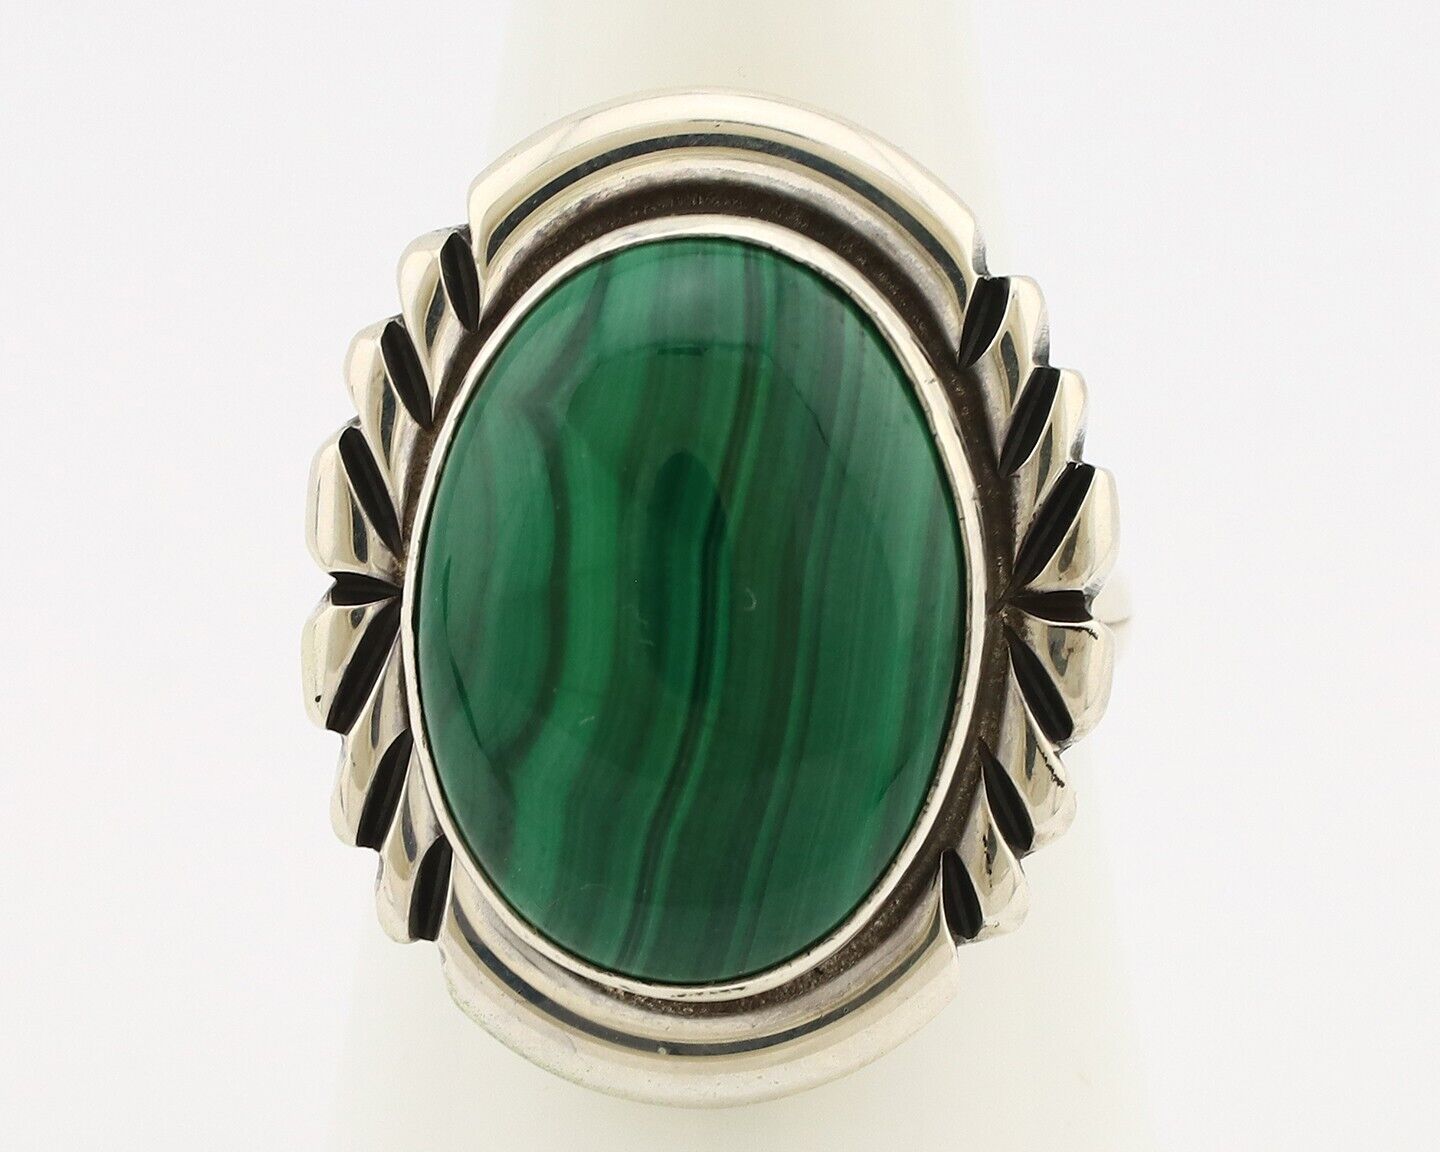 Navajo Ring 925 Silver Hand Stamped Mined Malachite Artist Signed NAKAI C.80's